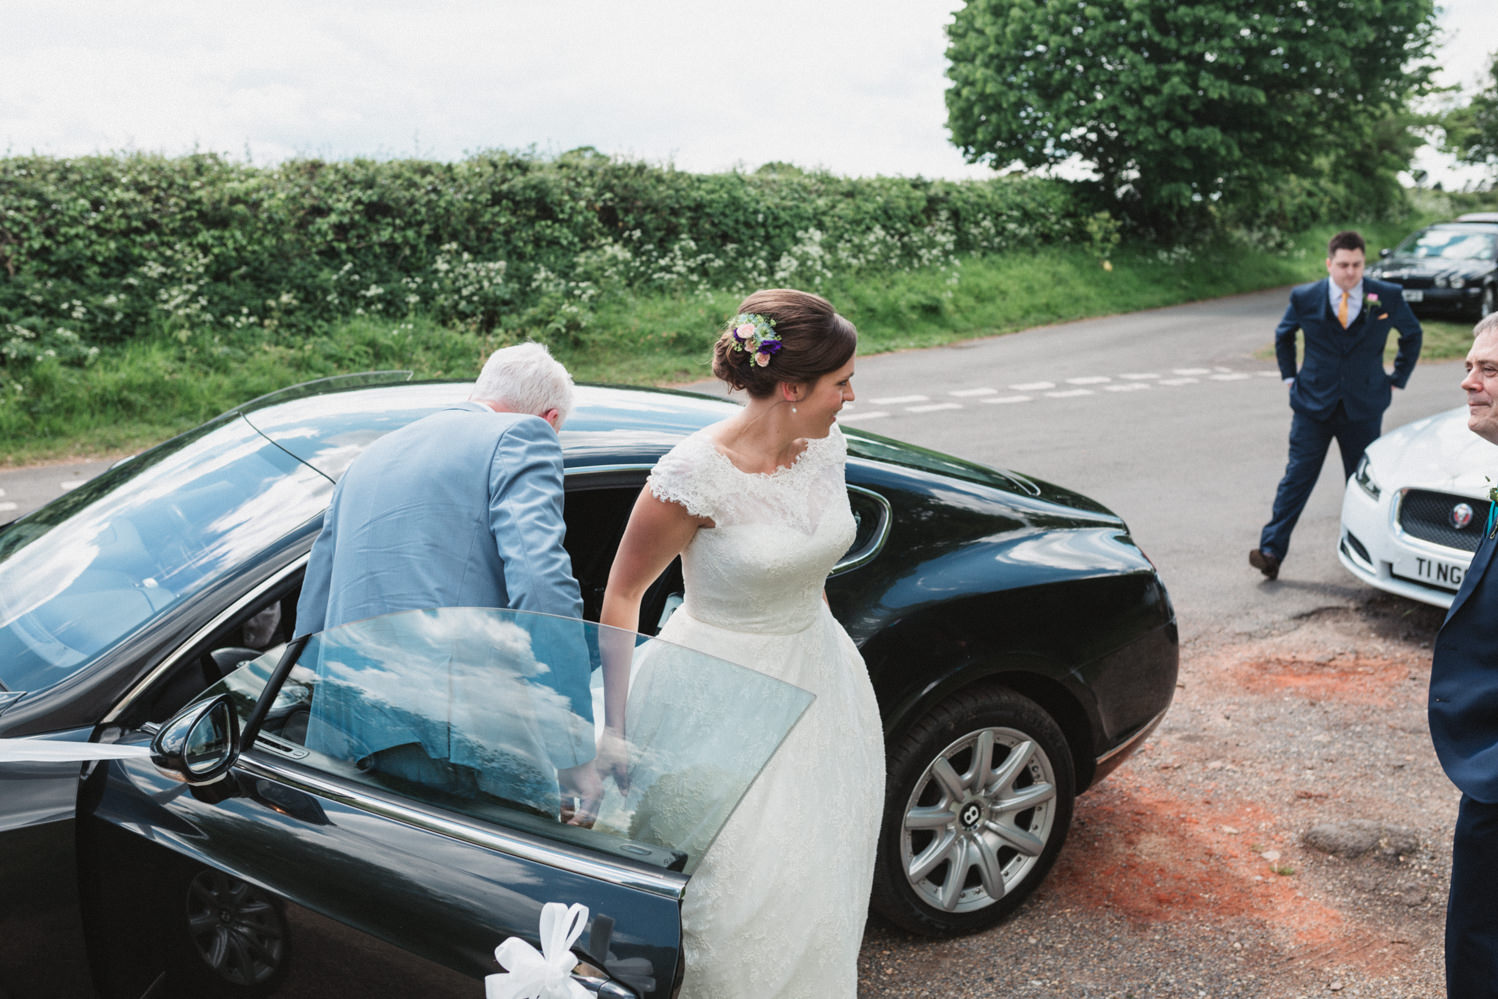 Relaxed norfolk bride arrives at the ceremony